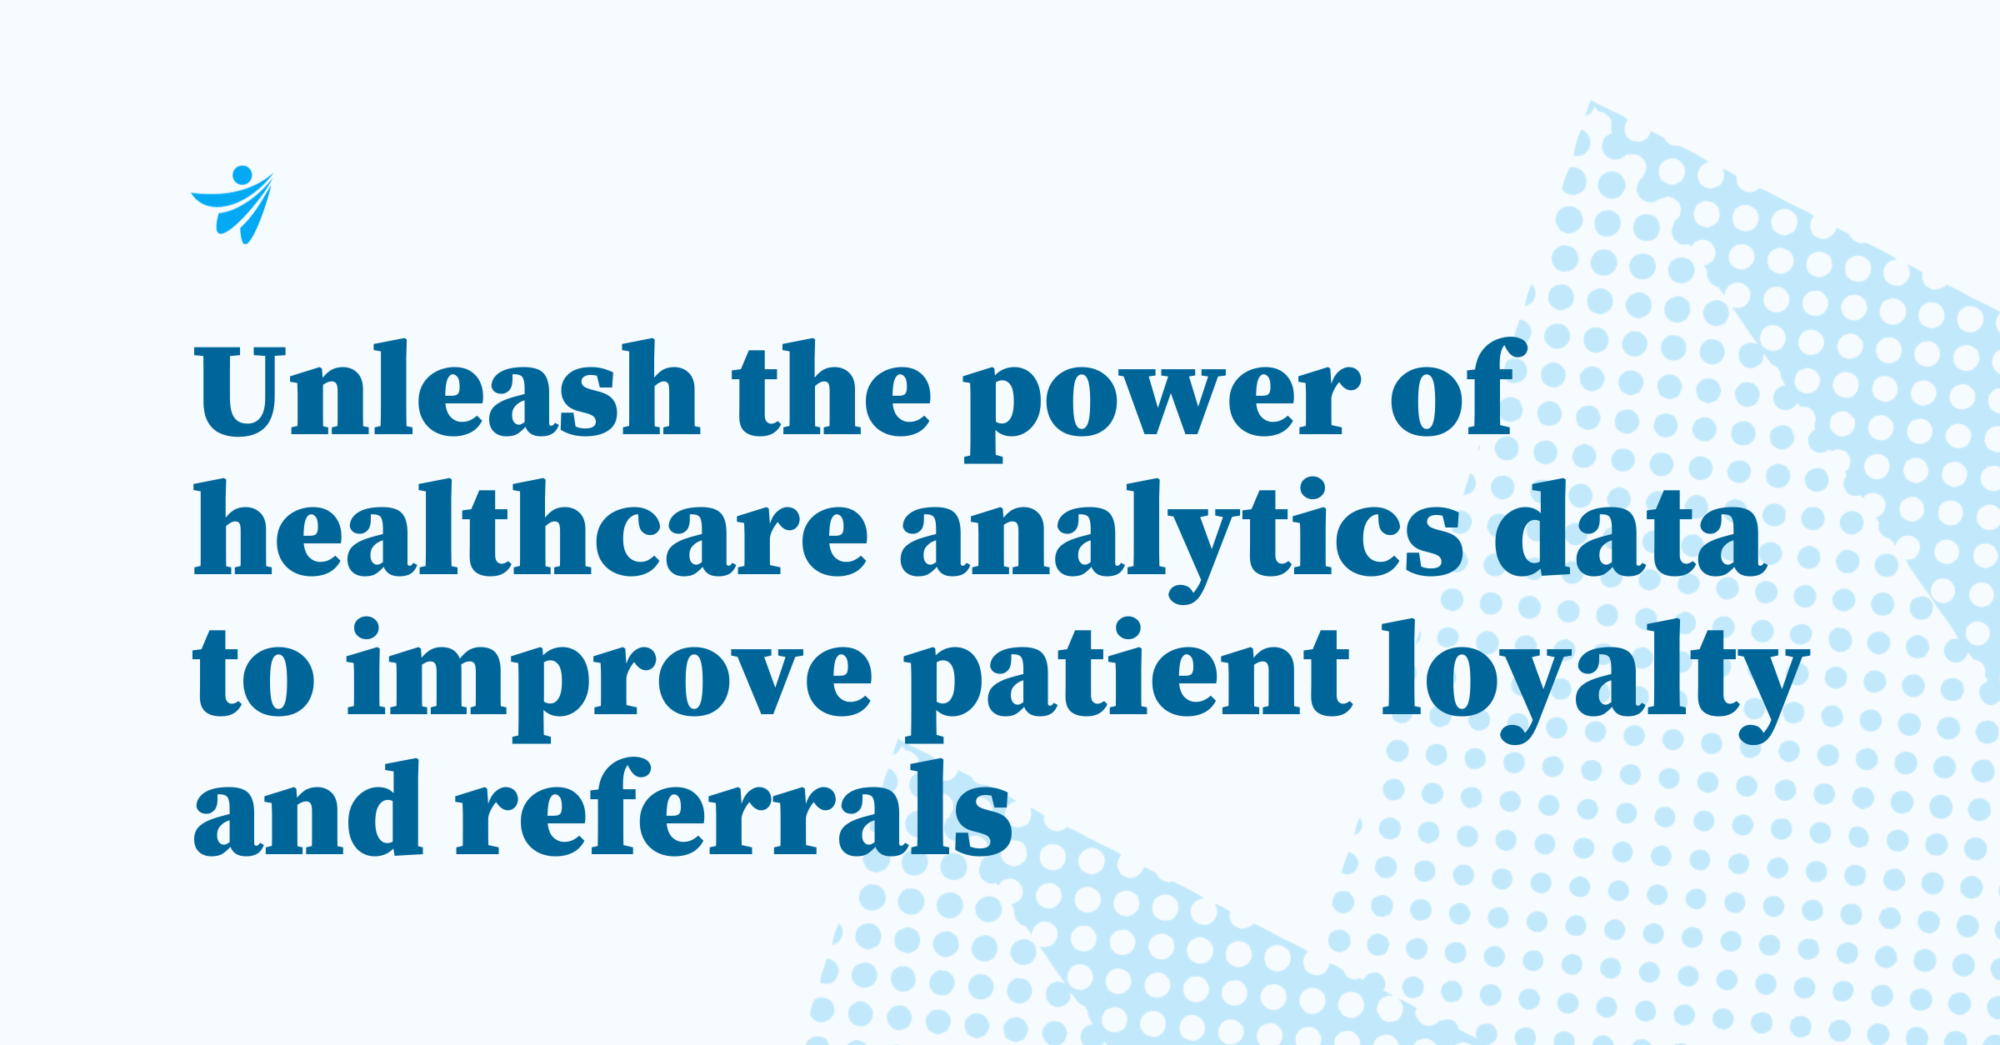 Thumbnail for Unleashing the power of healthcare analytics data to improve patient loyalty and referrals